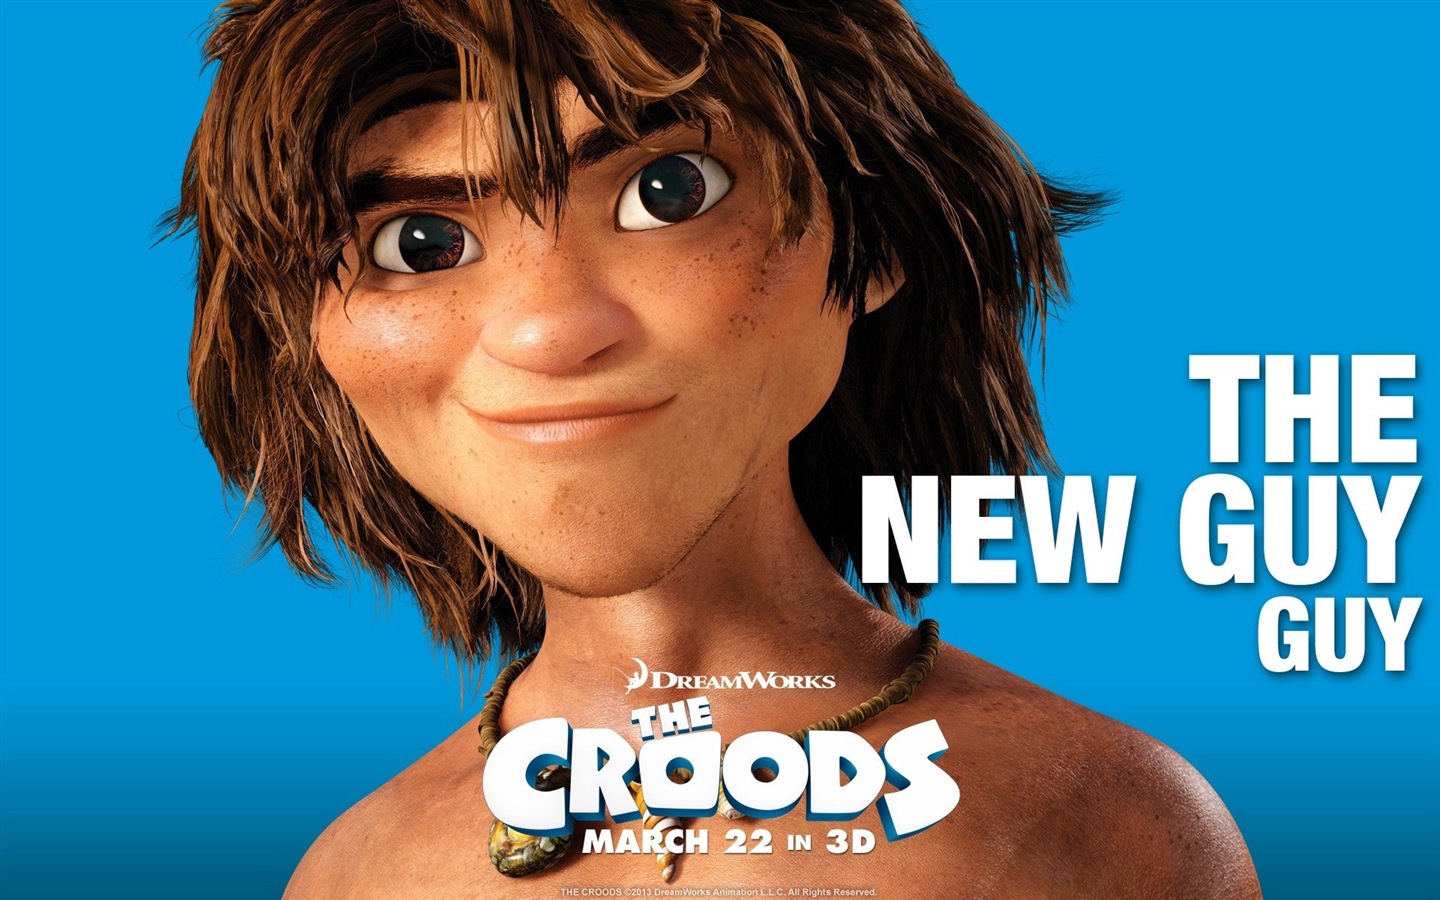 V Croods HD Movie Wallpapers #8 - 1440x900